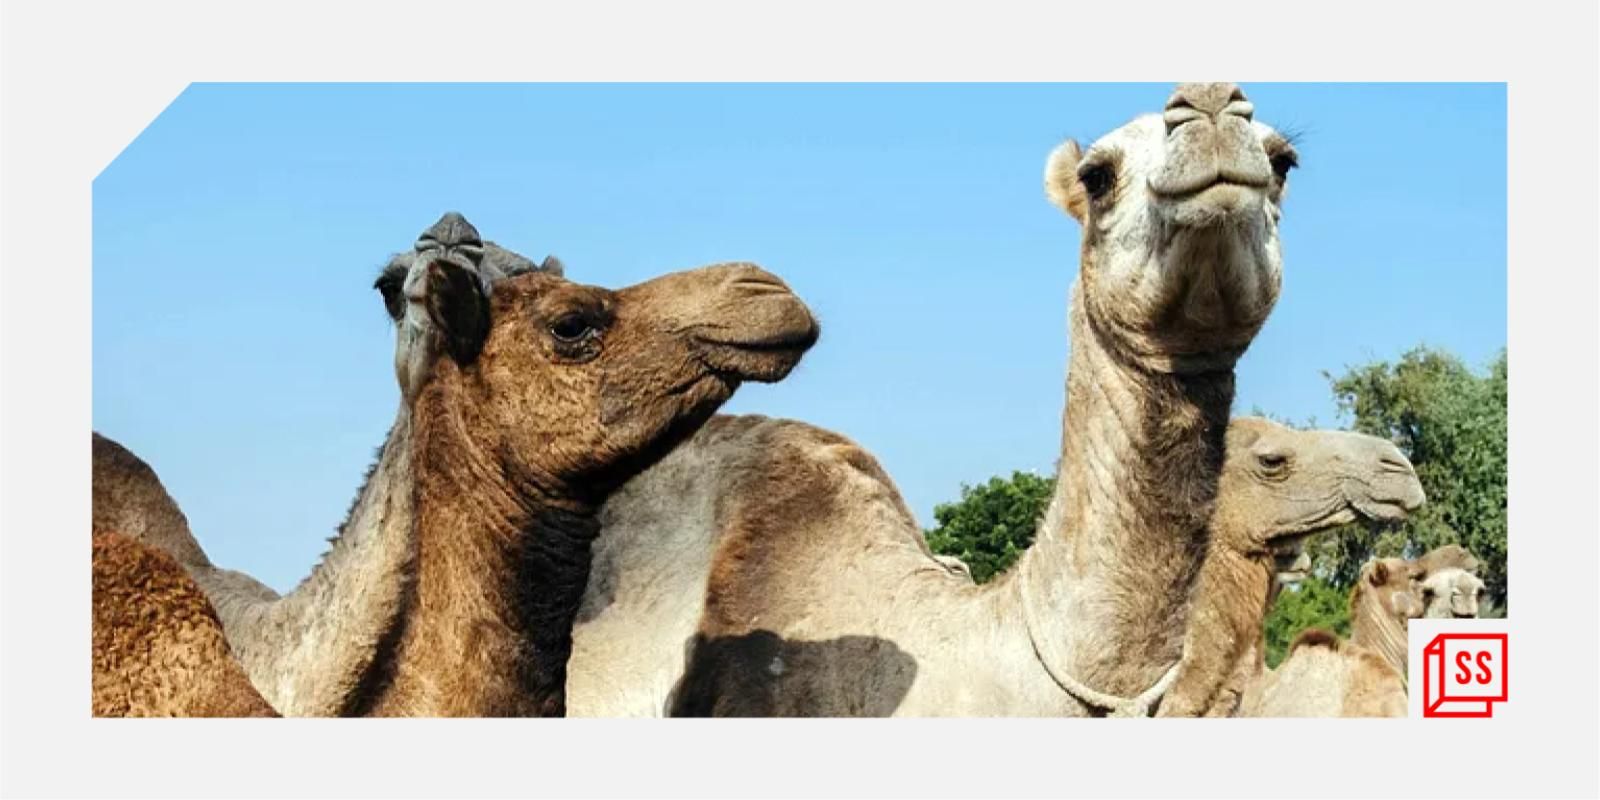 How this Sirohi-based NGO is saving camels in Rajasthan from getting slaughtered